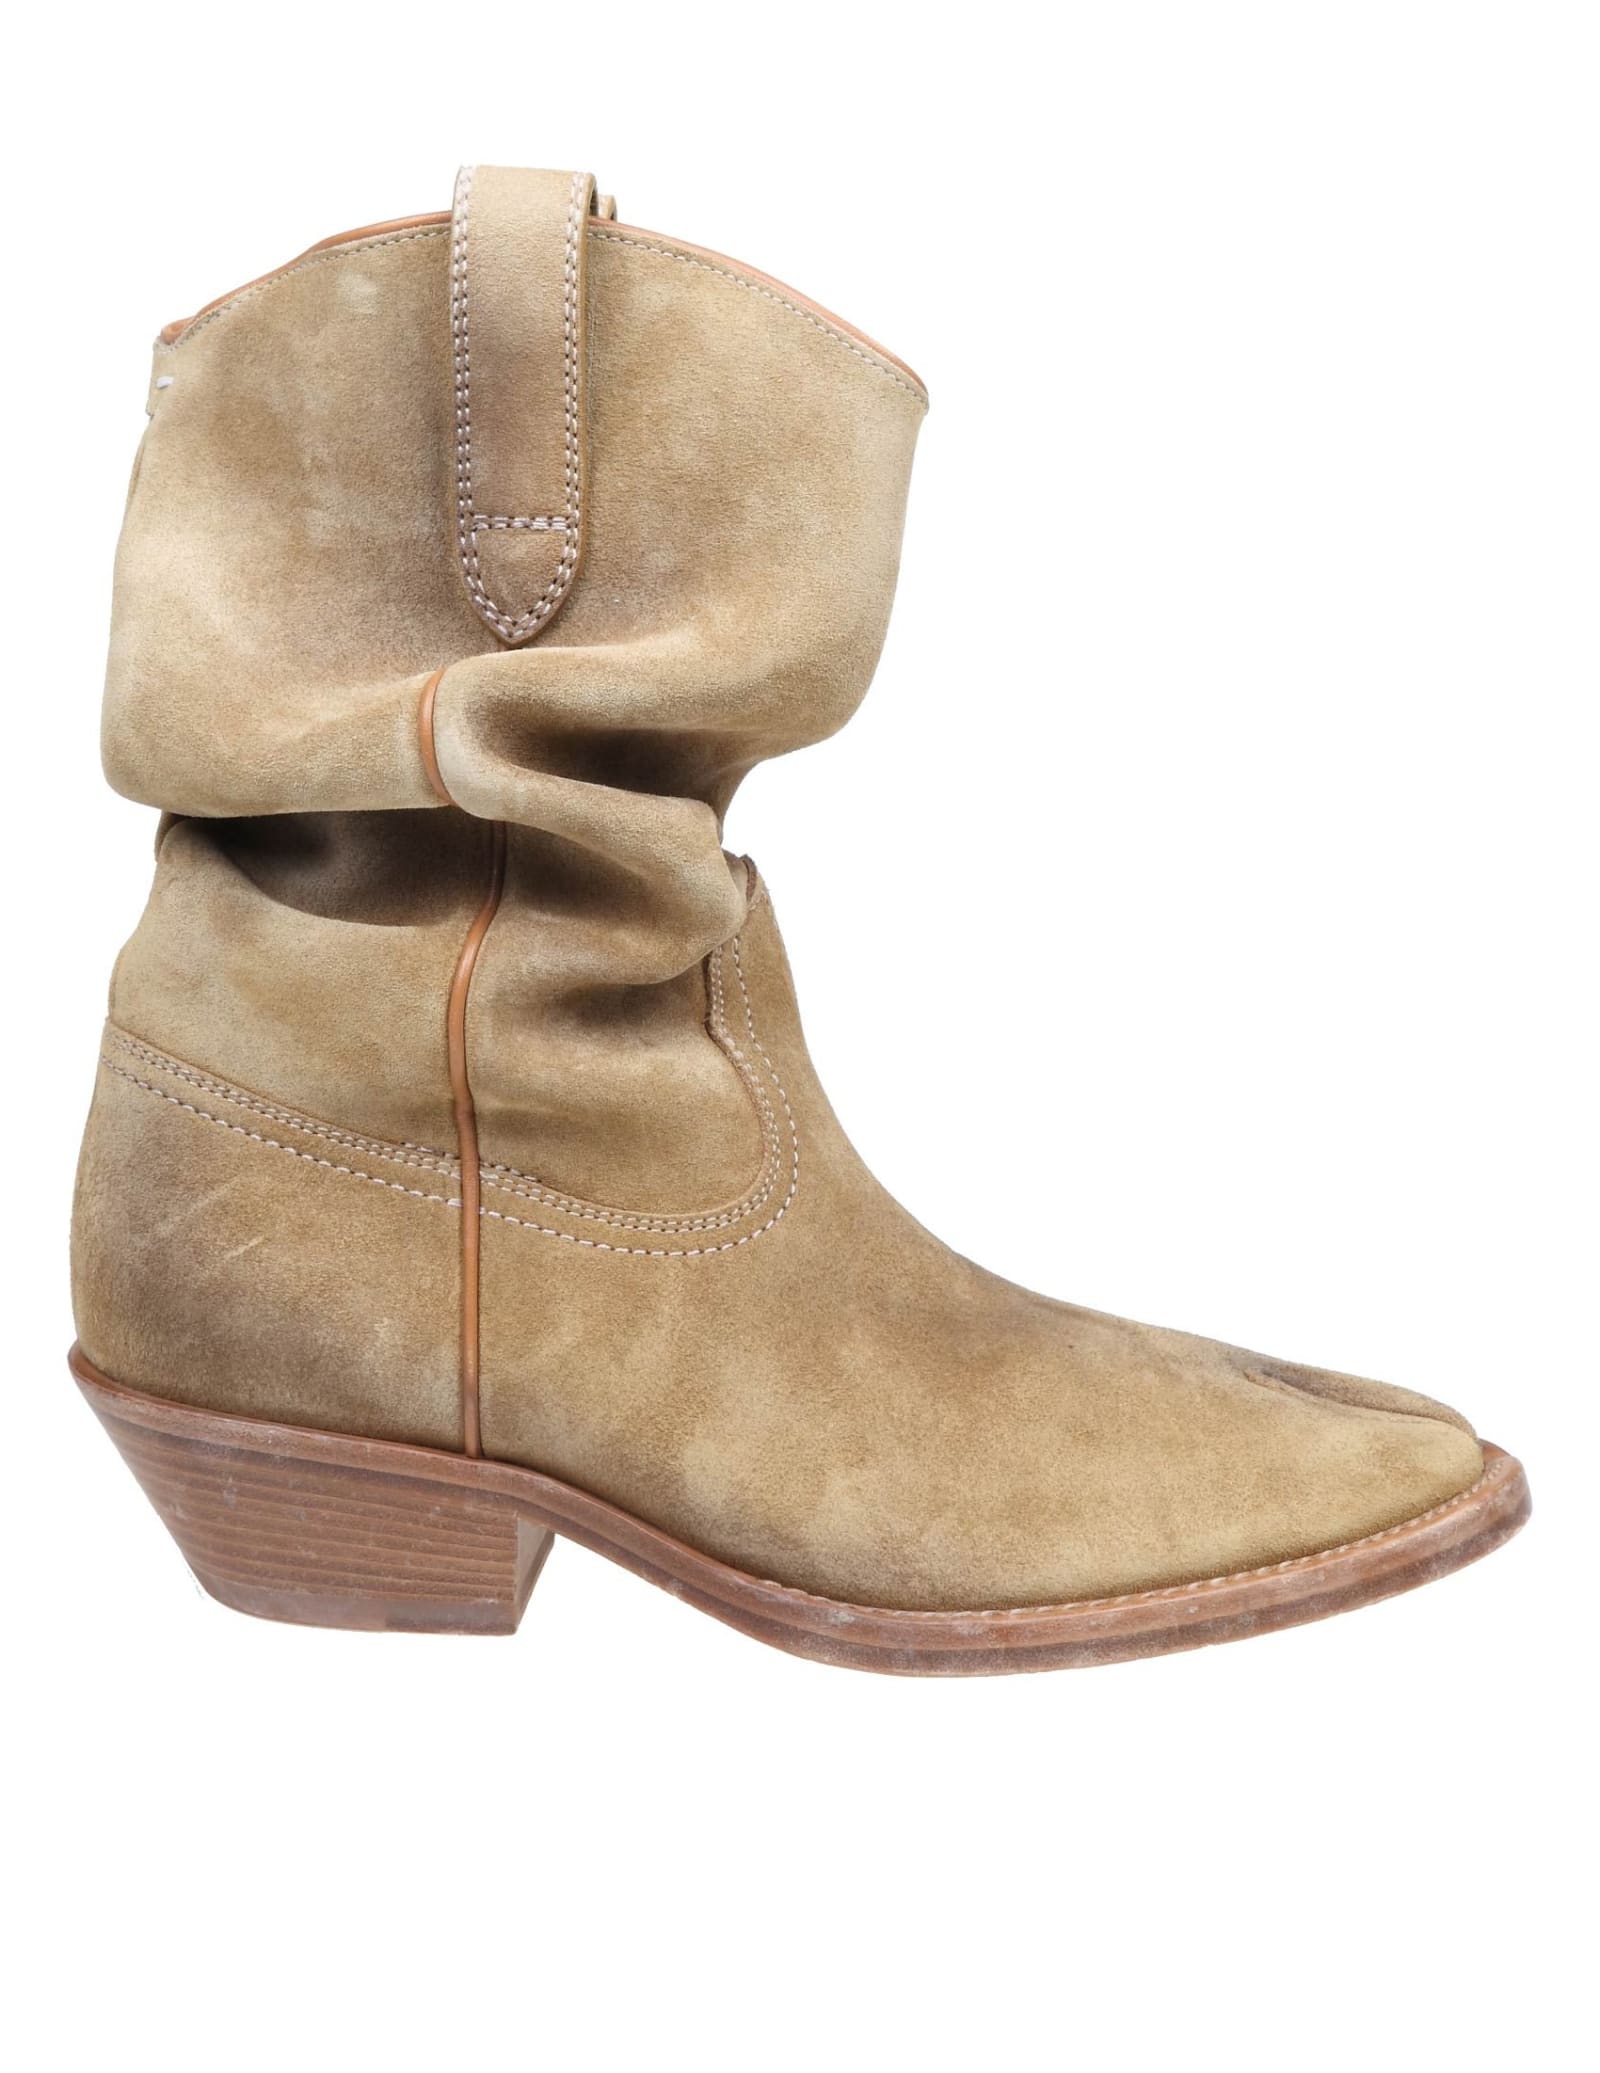 Maison Margiela Texan Tabi Boots In Suede Leather